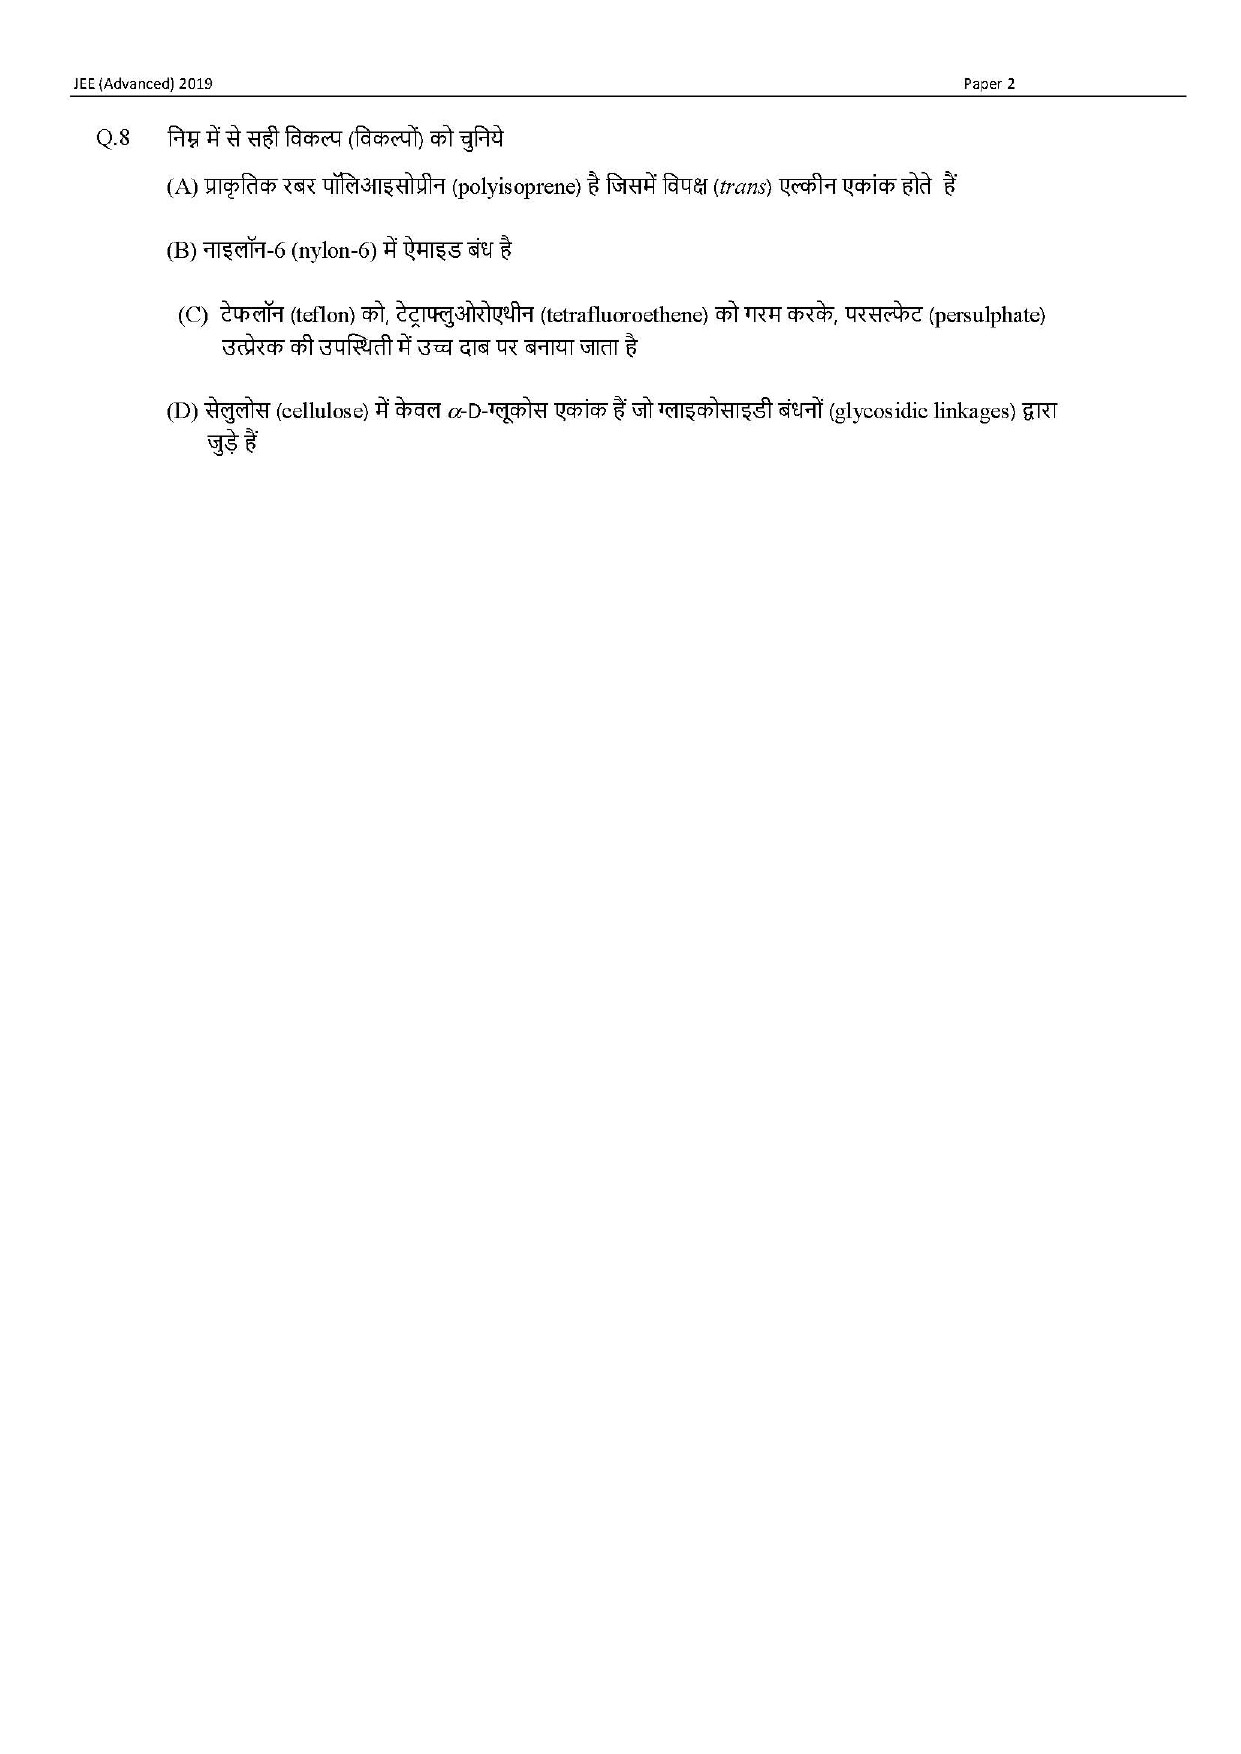 JEE Advanced Hindi Question Paper 2019 Paper 2 Chemistry 5